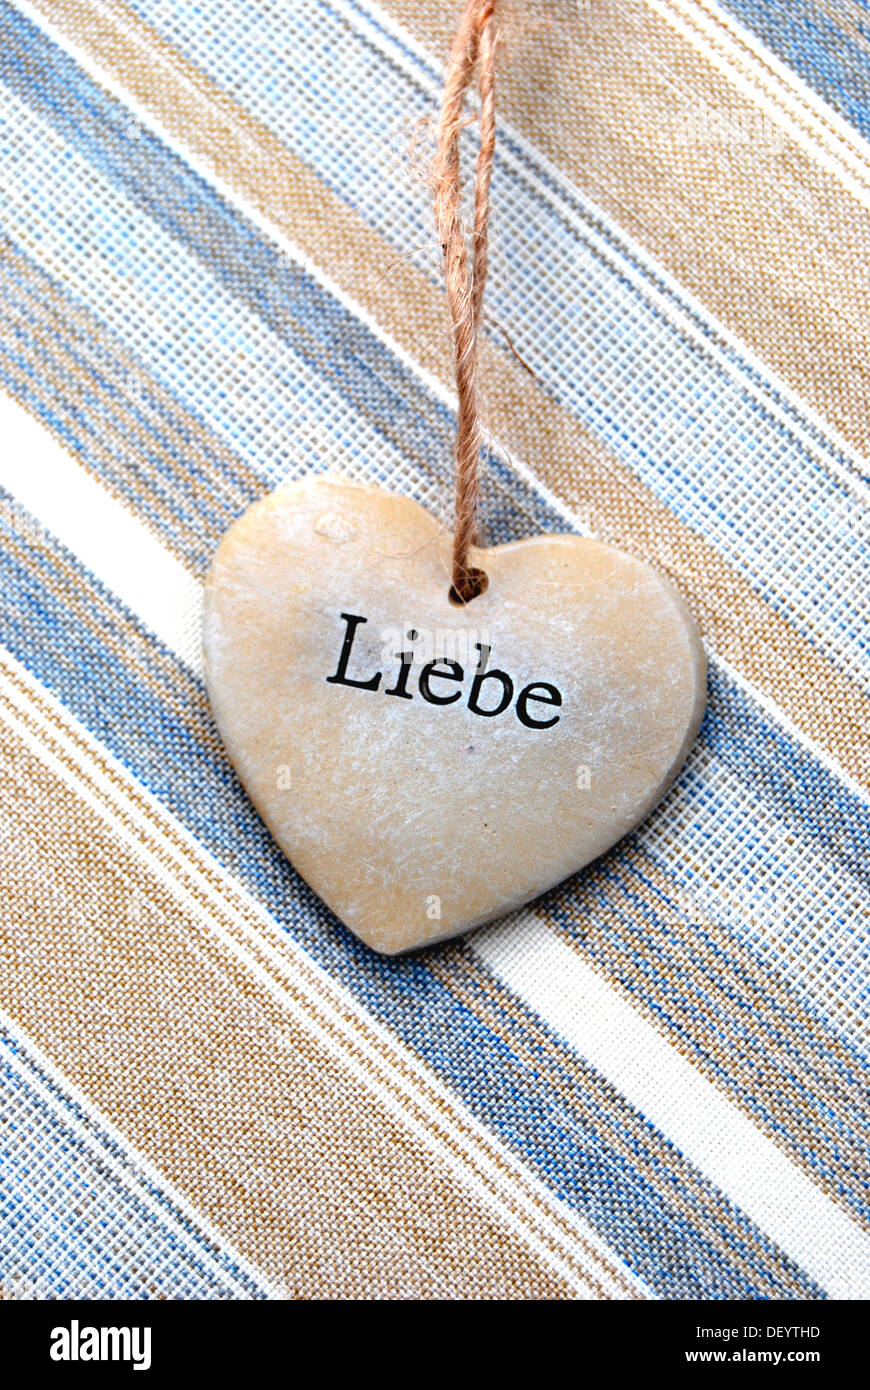 Lettering 'Liebe', German for 'love' on a heart of stone Stock Photo